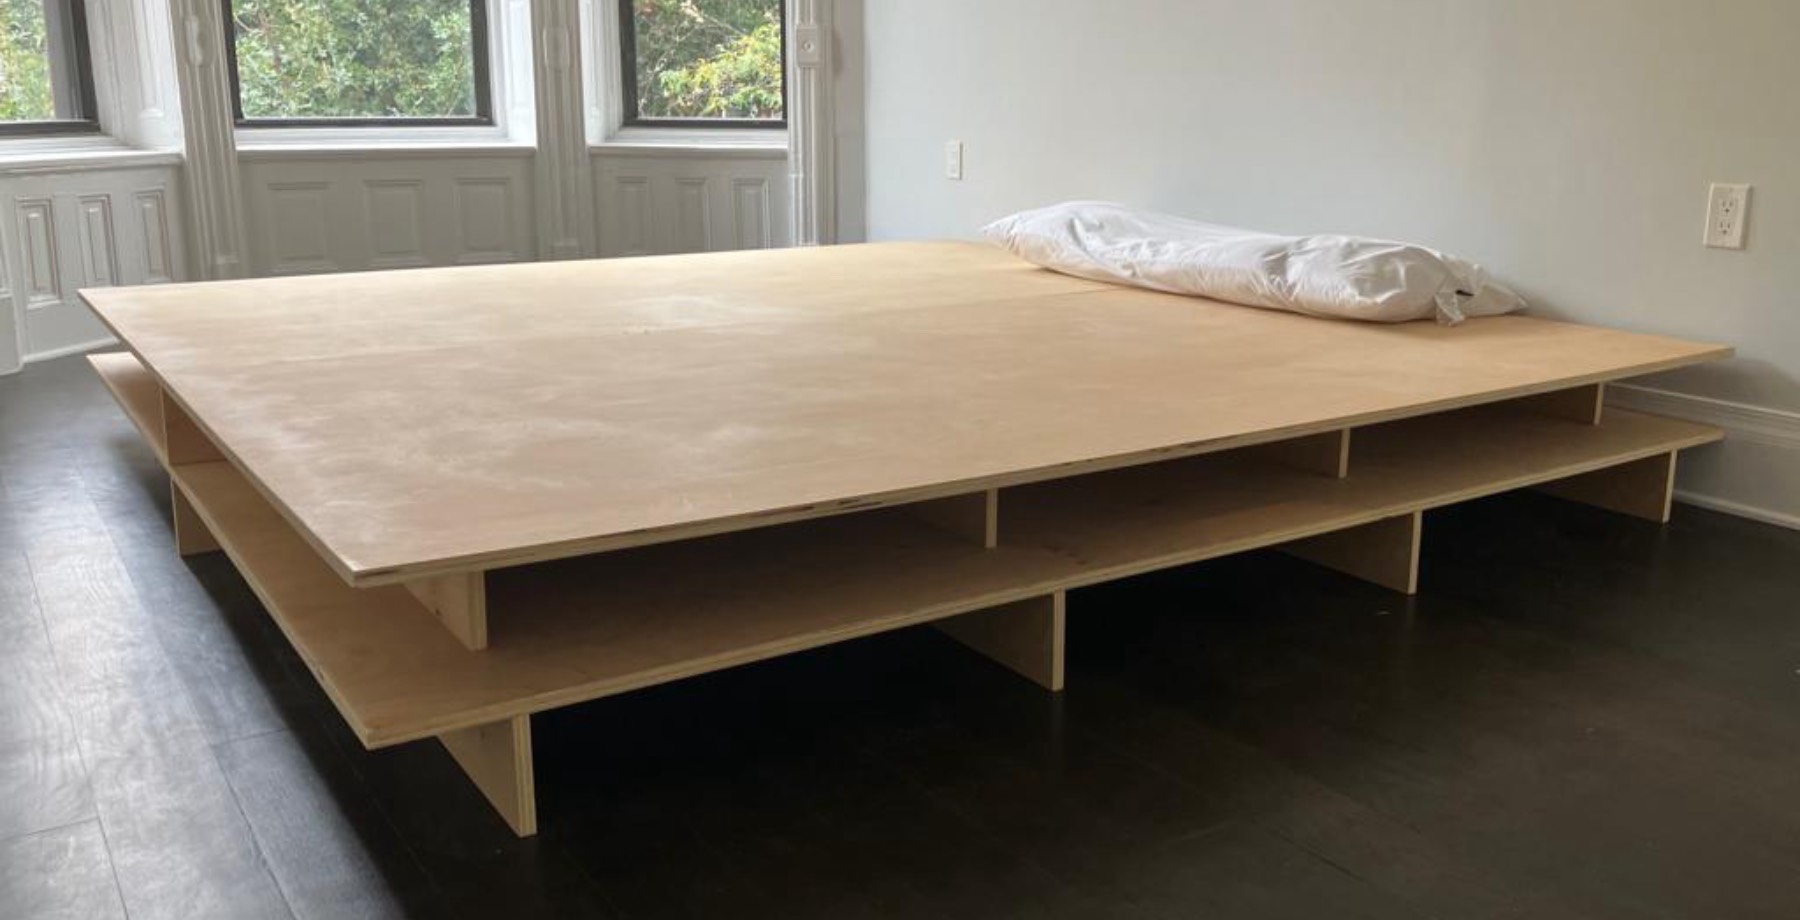 A bed frame made by Aconite